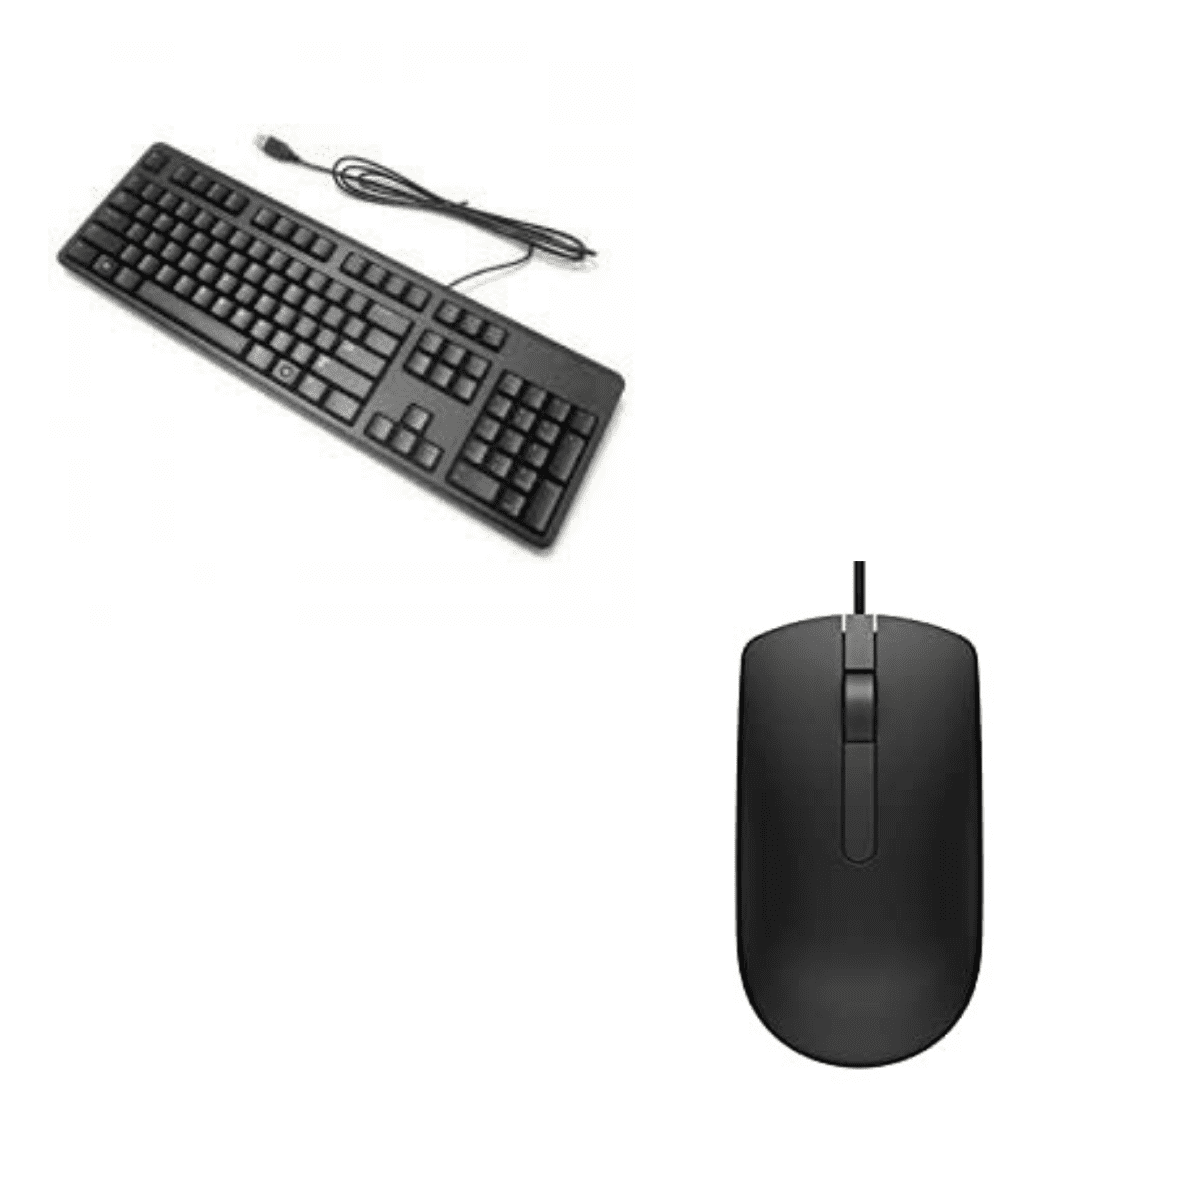 Bundle Offer 1 – Dell MS116 Optical Mouse + Dell KB216 Wired Multimedia USB  Keyboard | HeadsetsIndia